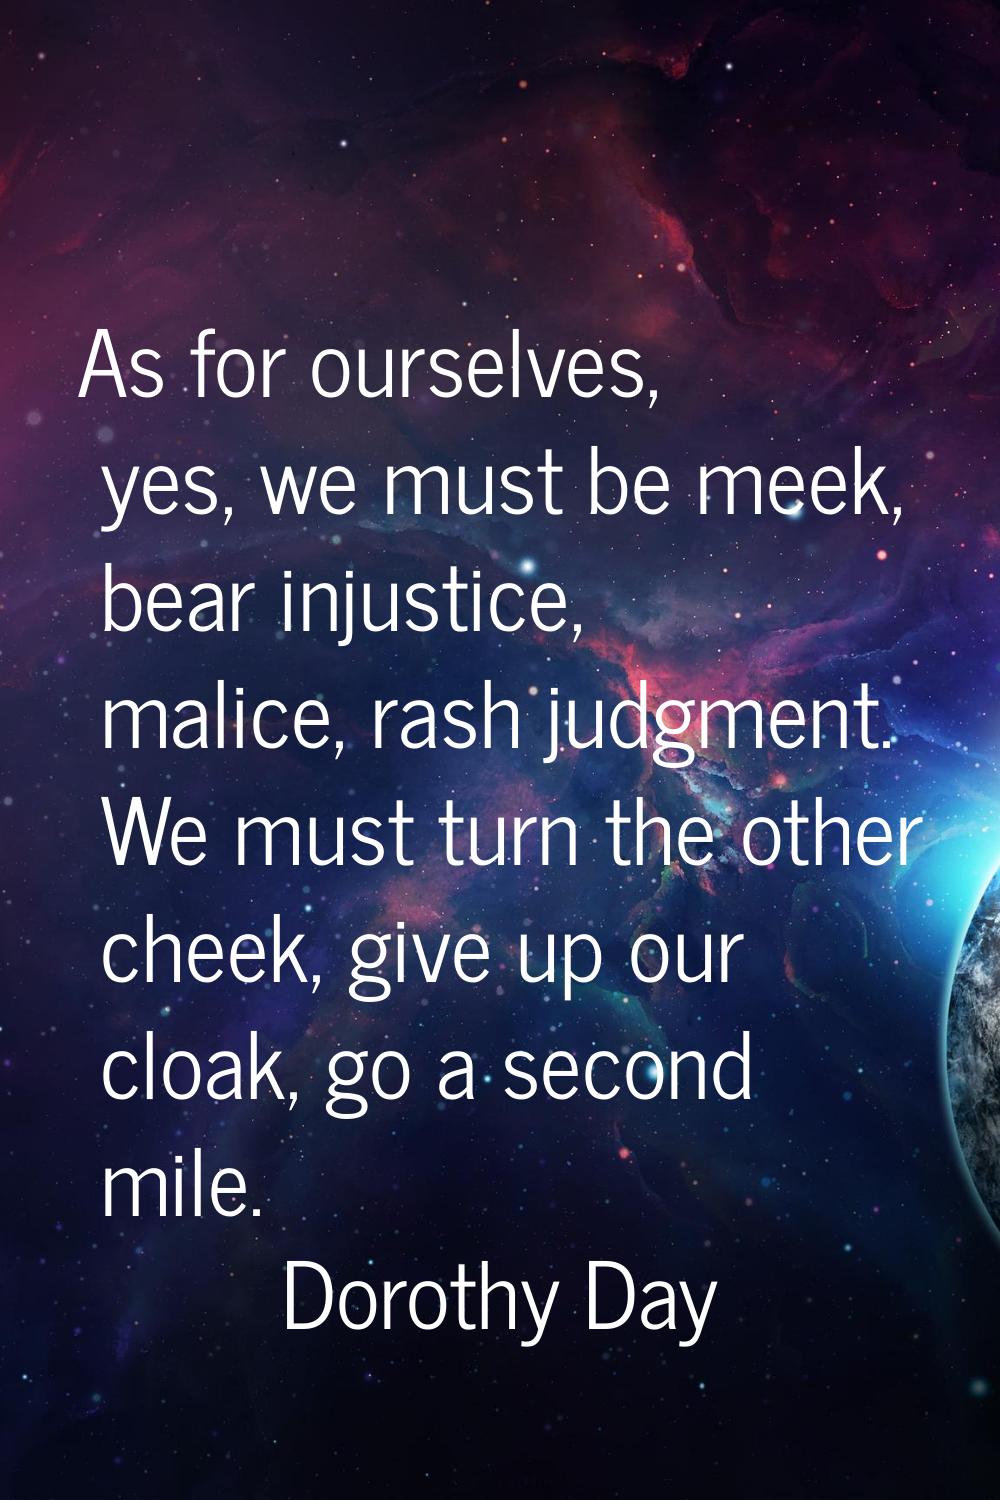 As for ourselves, yes, we must be meek, bear injustice, malice, rash judgment. We must turn the oth